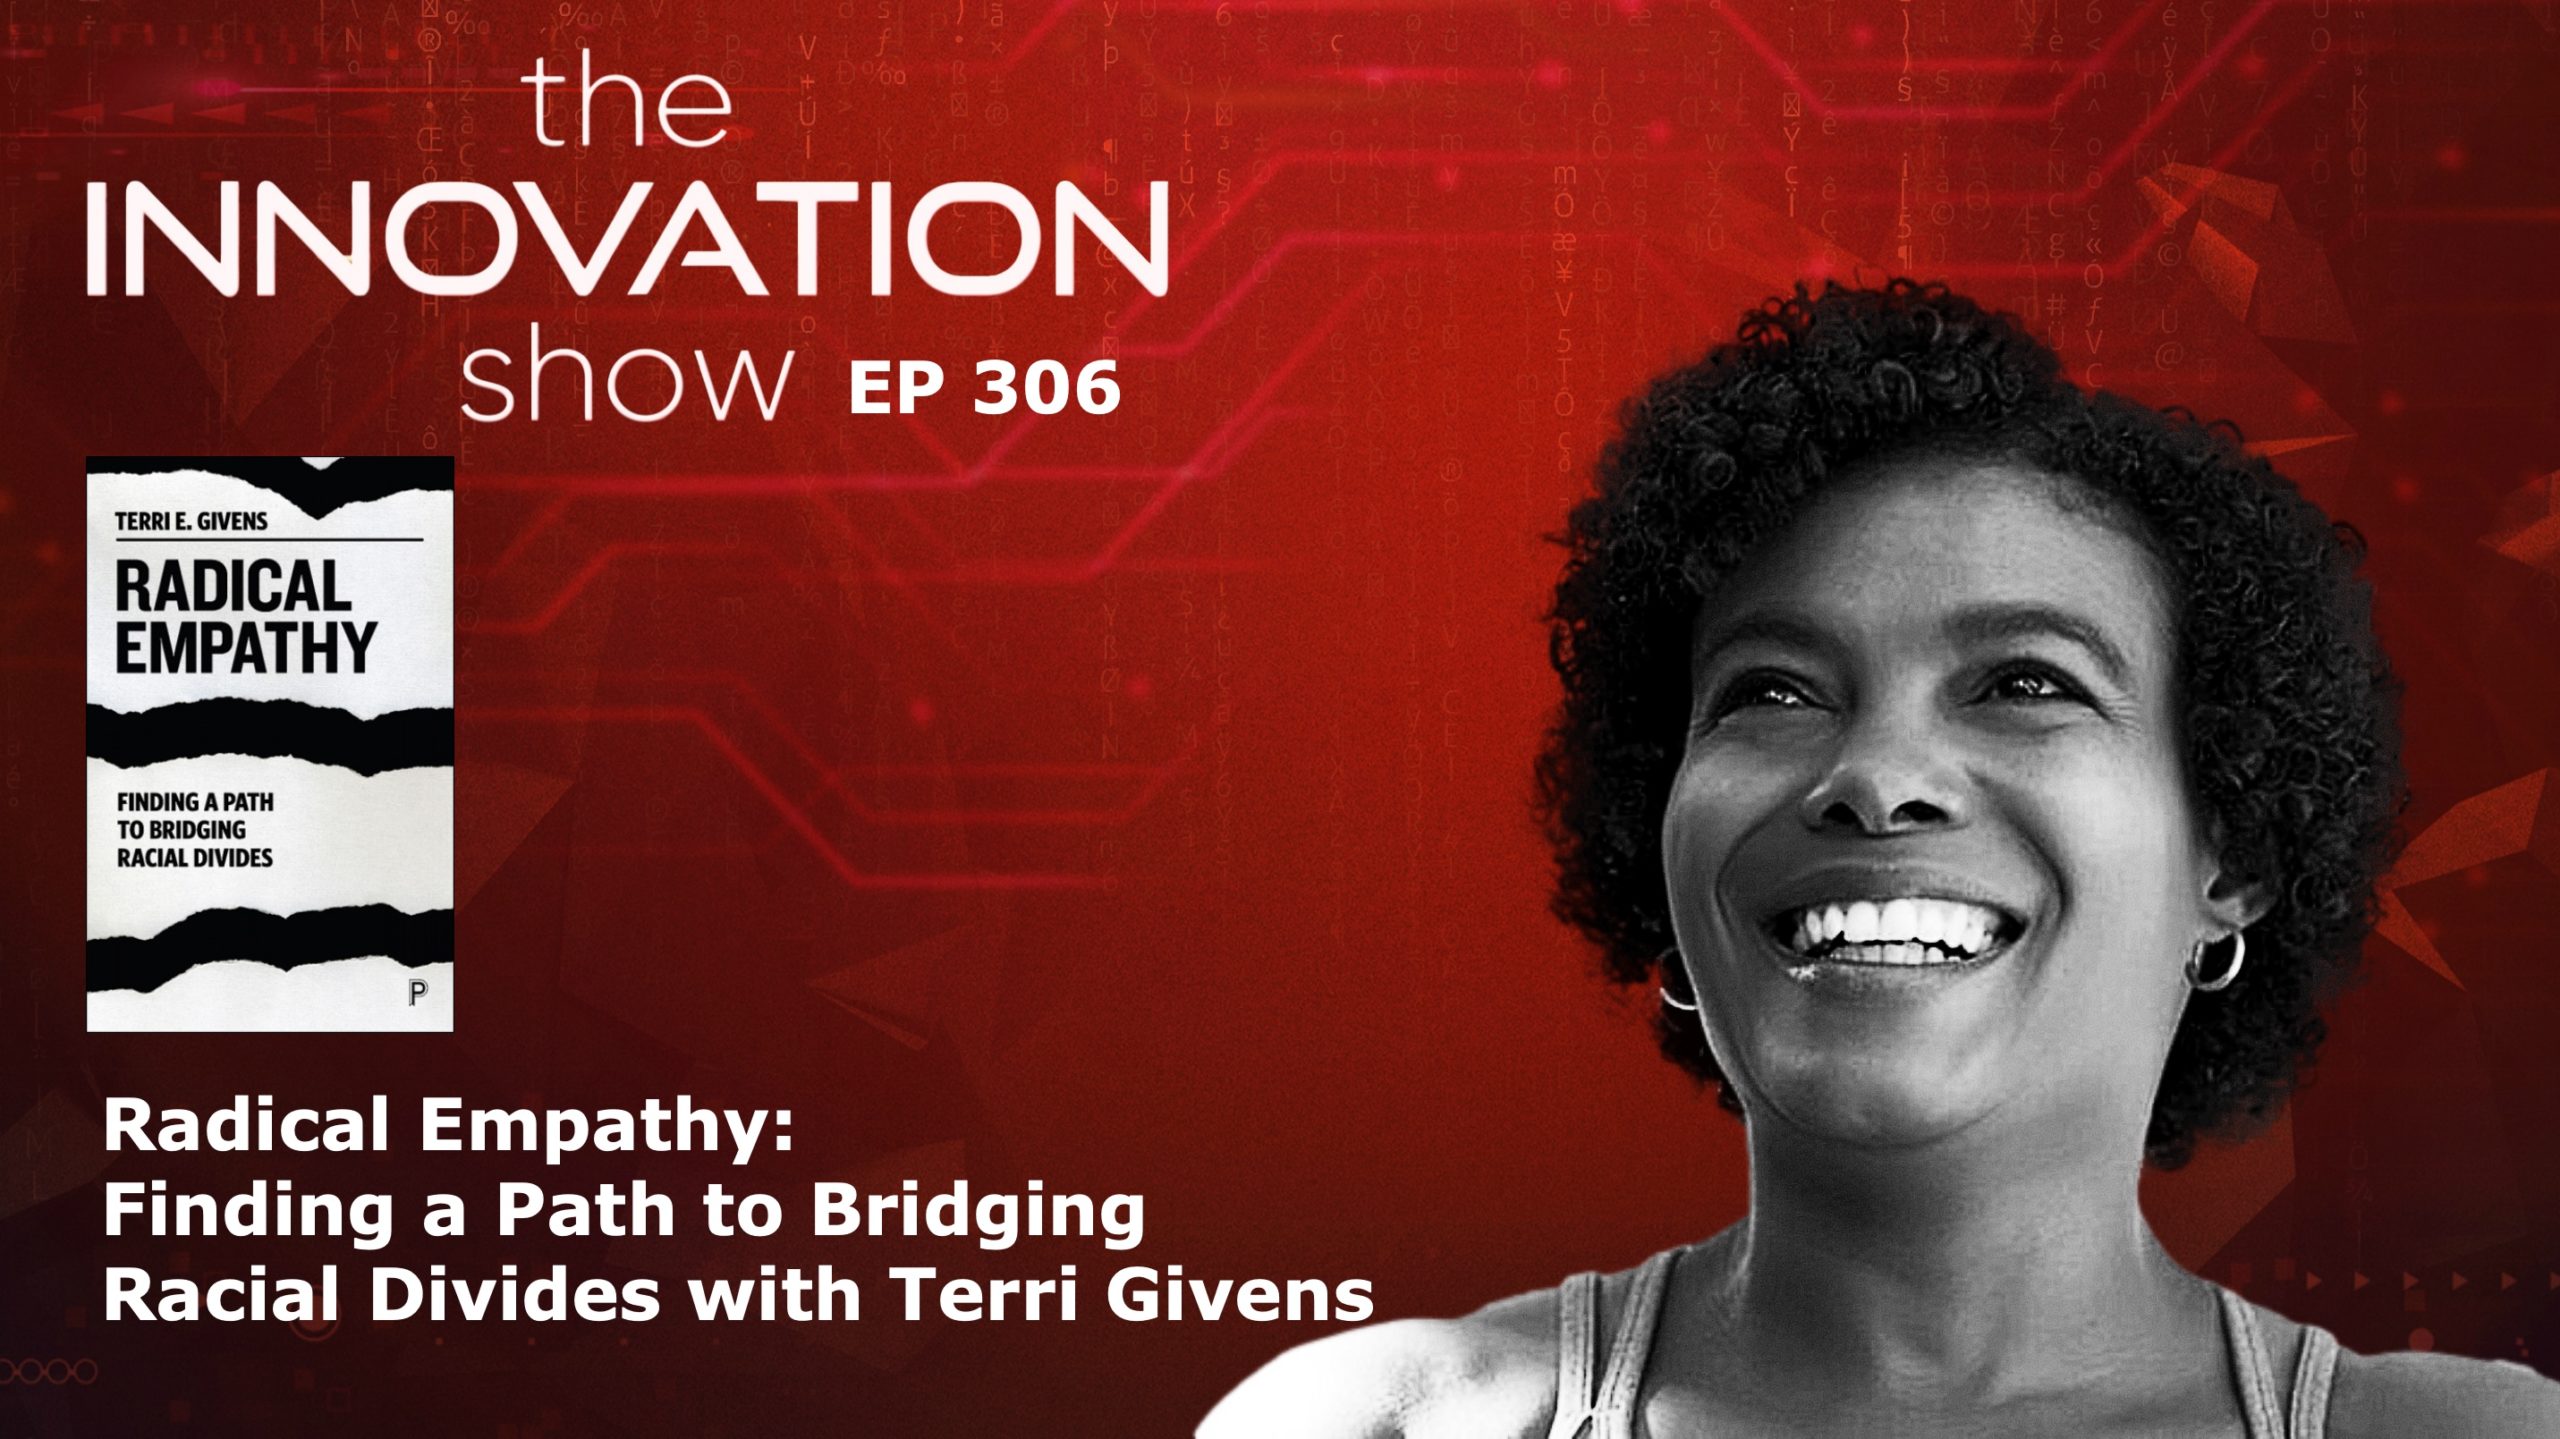 Radical Empathy Finding a Path to Bridging Racial Divides with Terri Givens